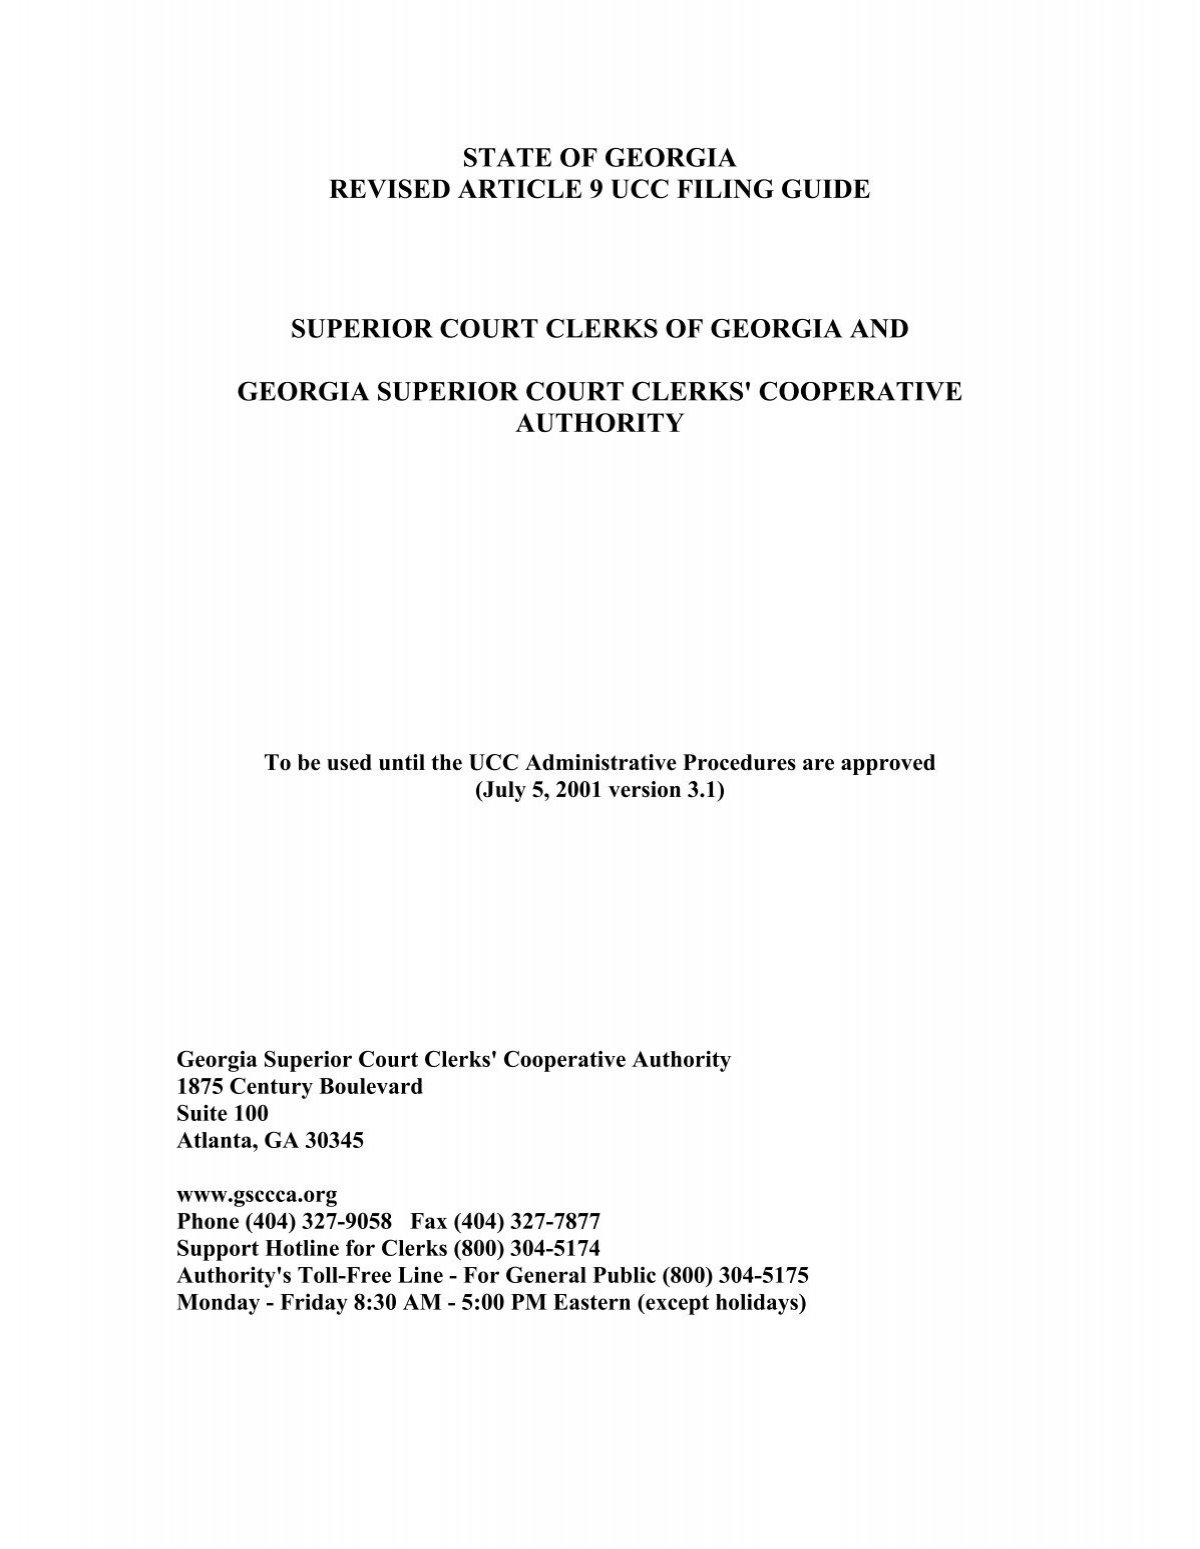 Article 9 UCC Filing Guide Georgia Superior Court Clerks